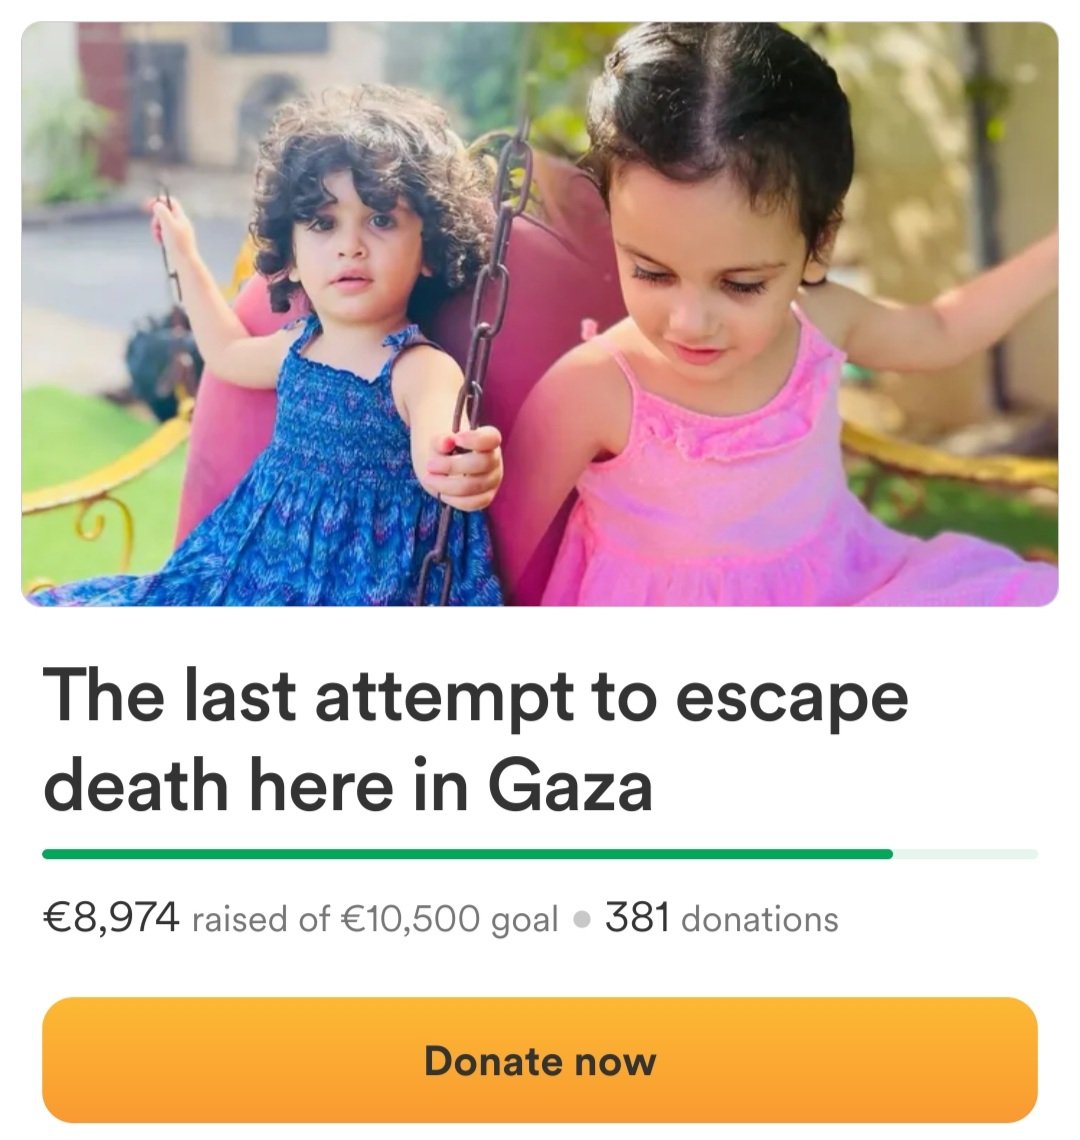 Hi, guys! This family in Gaza is very close to reaching their goal. We can help them escape the genocide. gofund.me/d1c0bb45